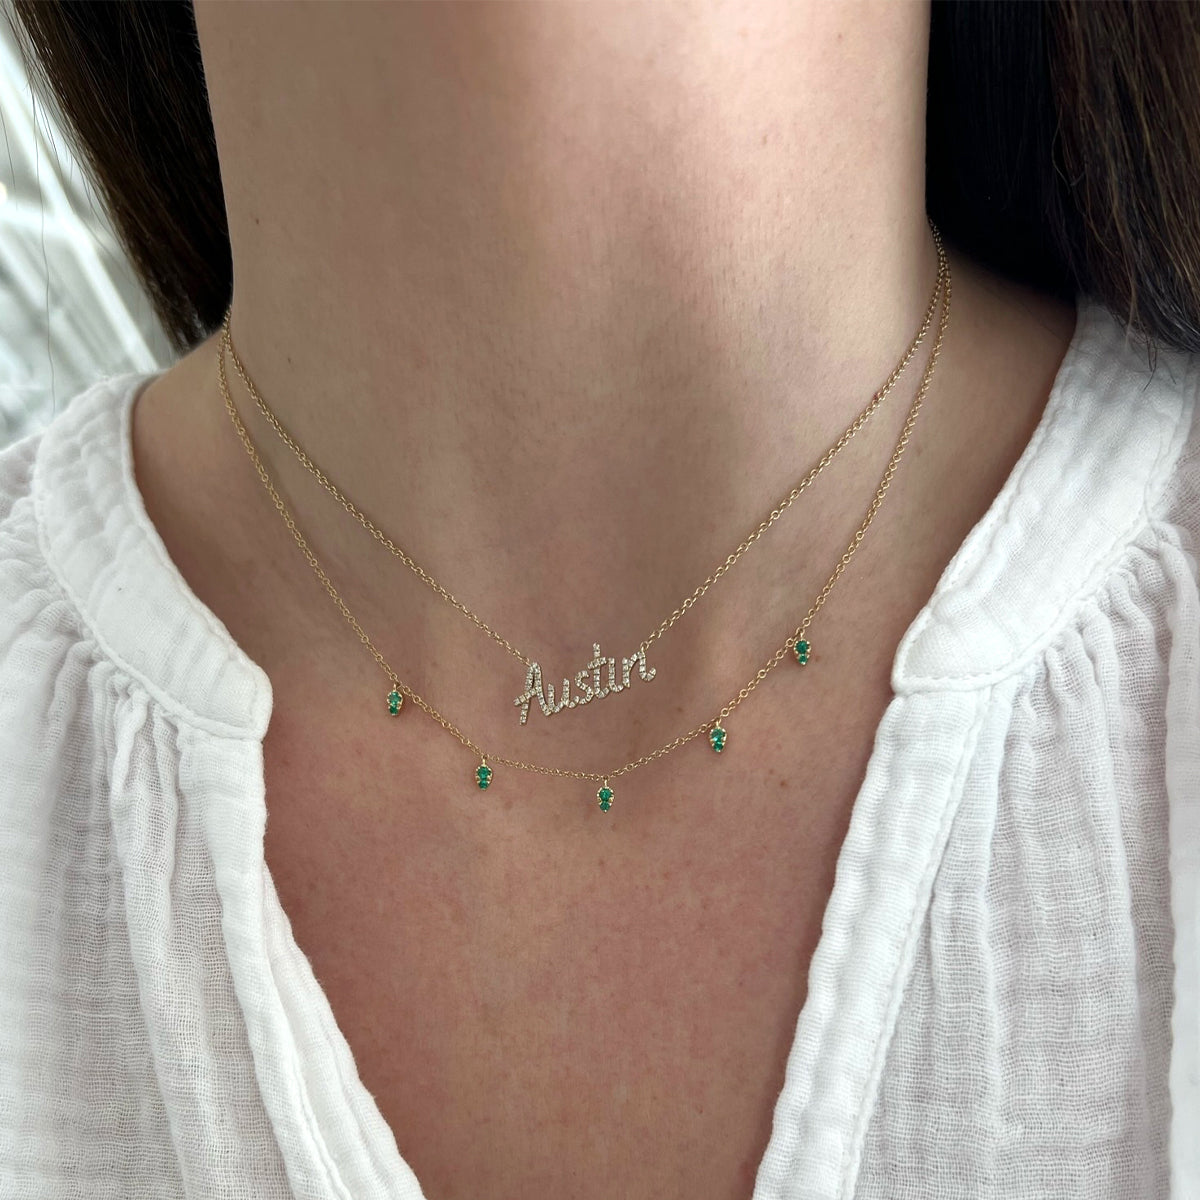 Emerald 5 Teardrop Choker Necklace in 14k yellow gold layered with custom script necklace in Austin both necklaces styled on neck of model wearing white blouse